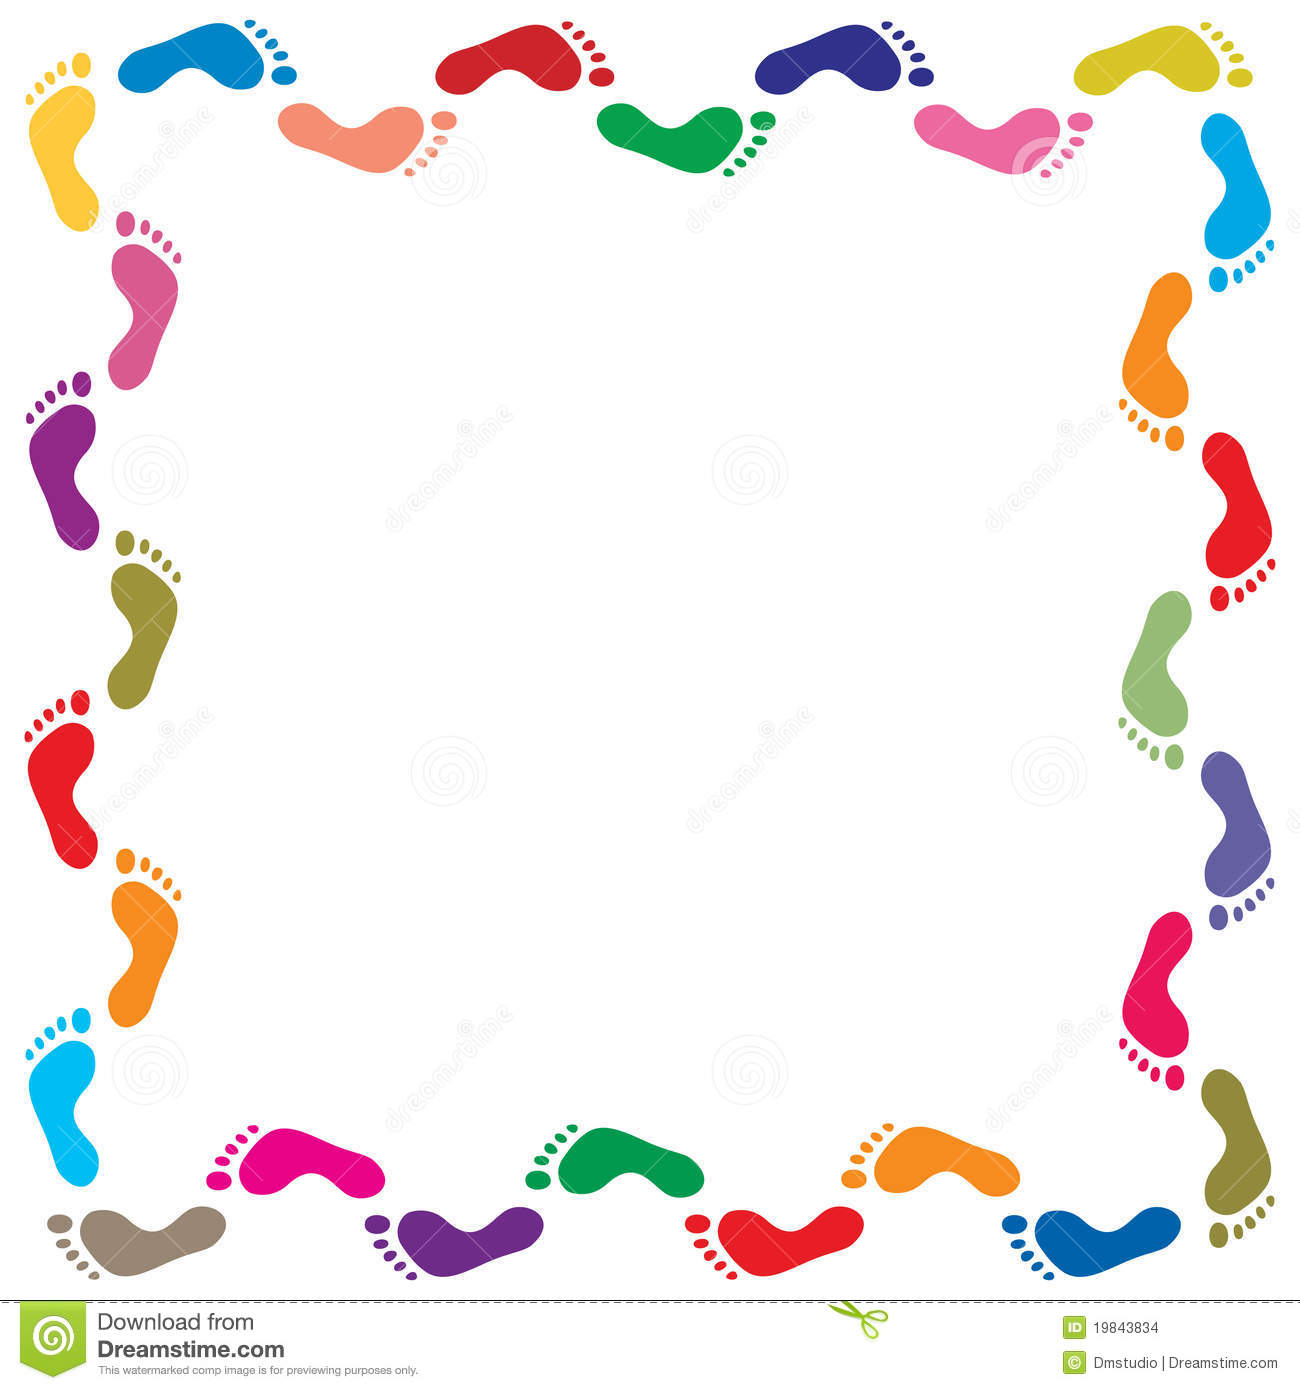 Colorful Footprints Border Stock Images   Image  19843834